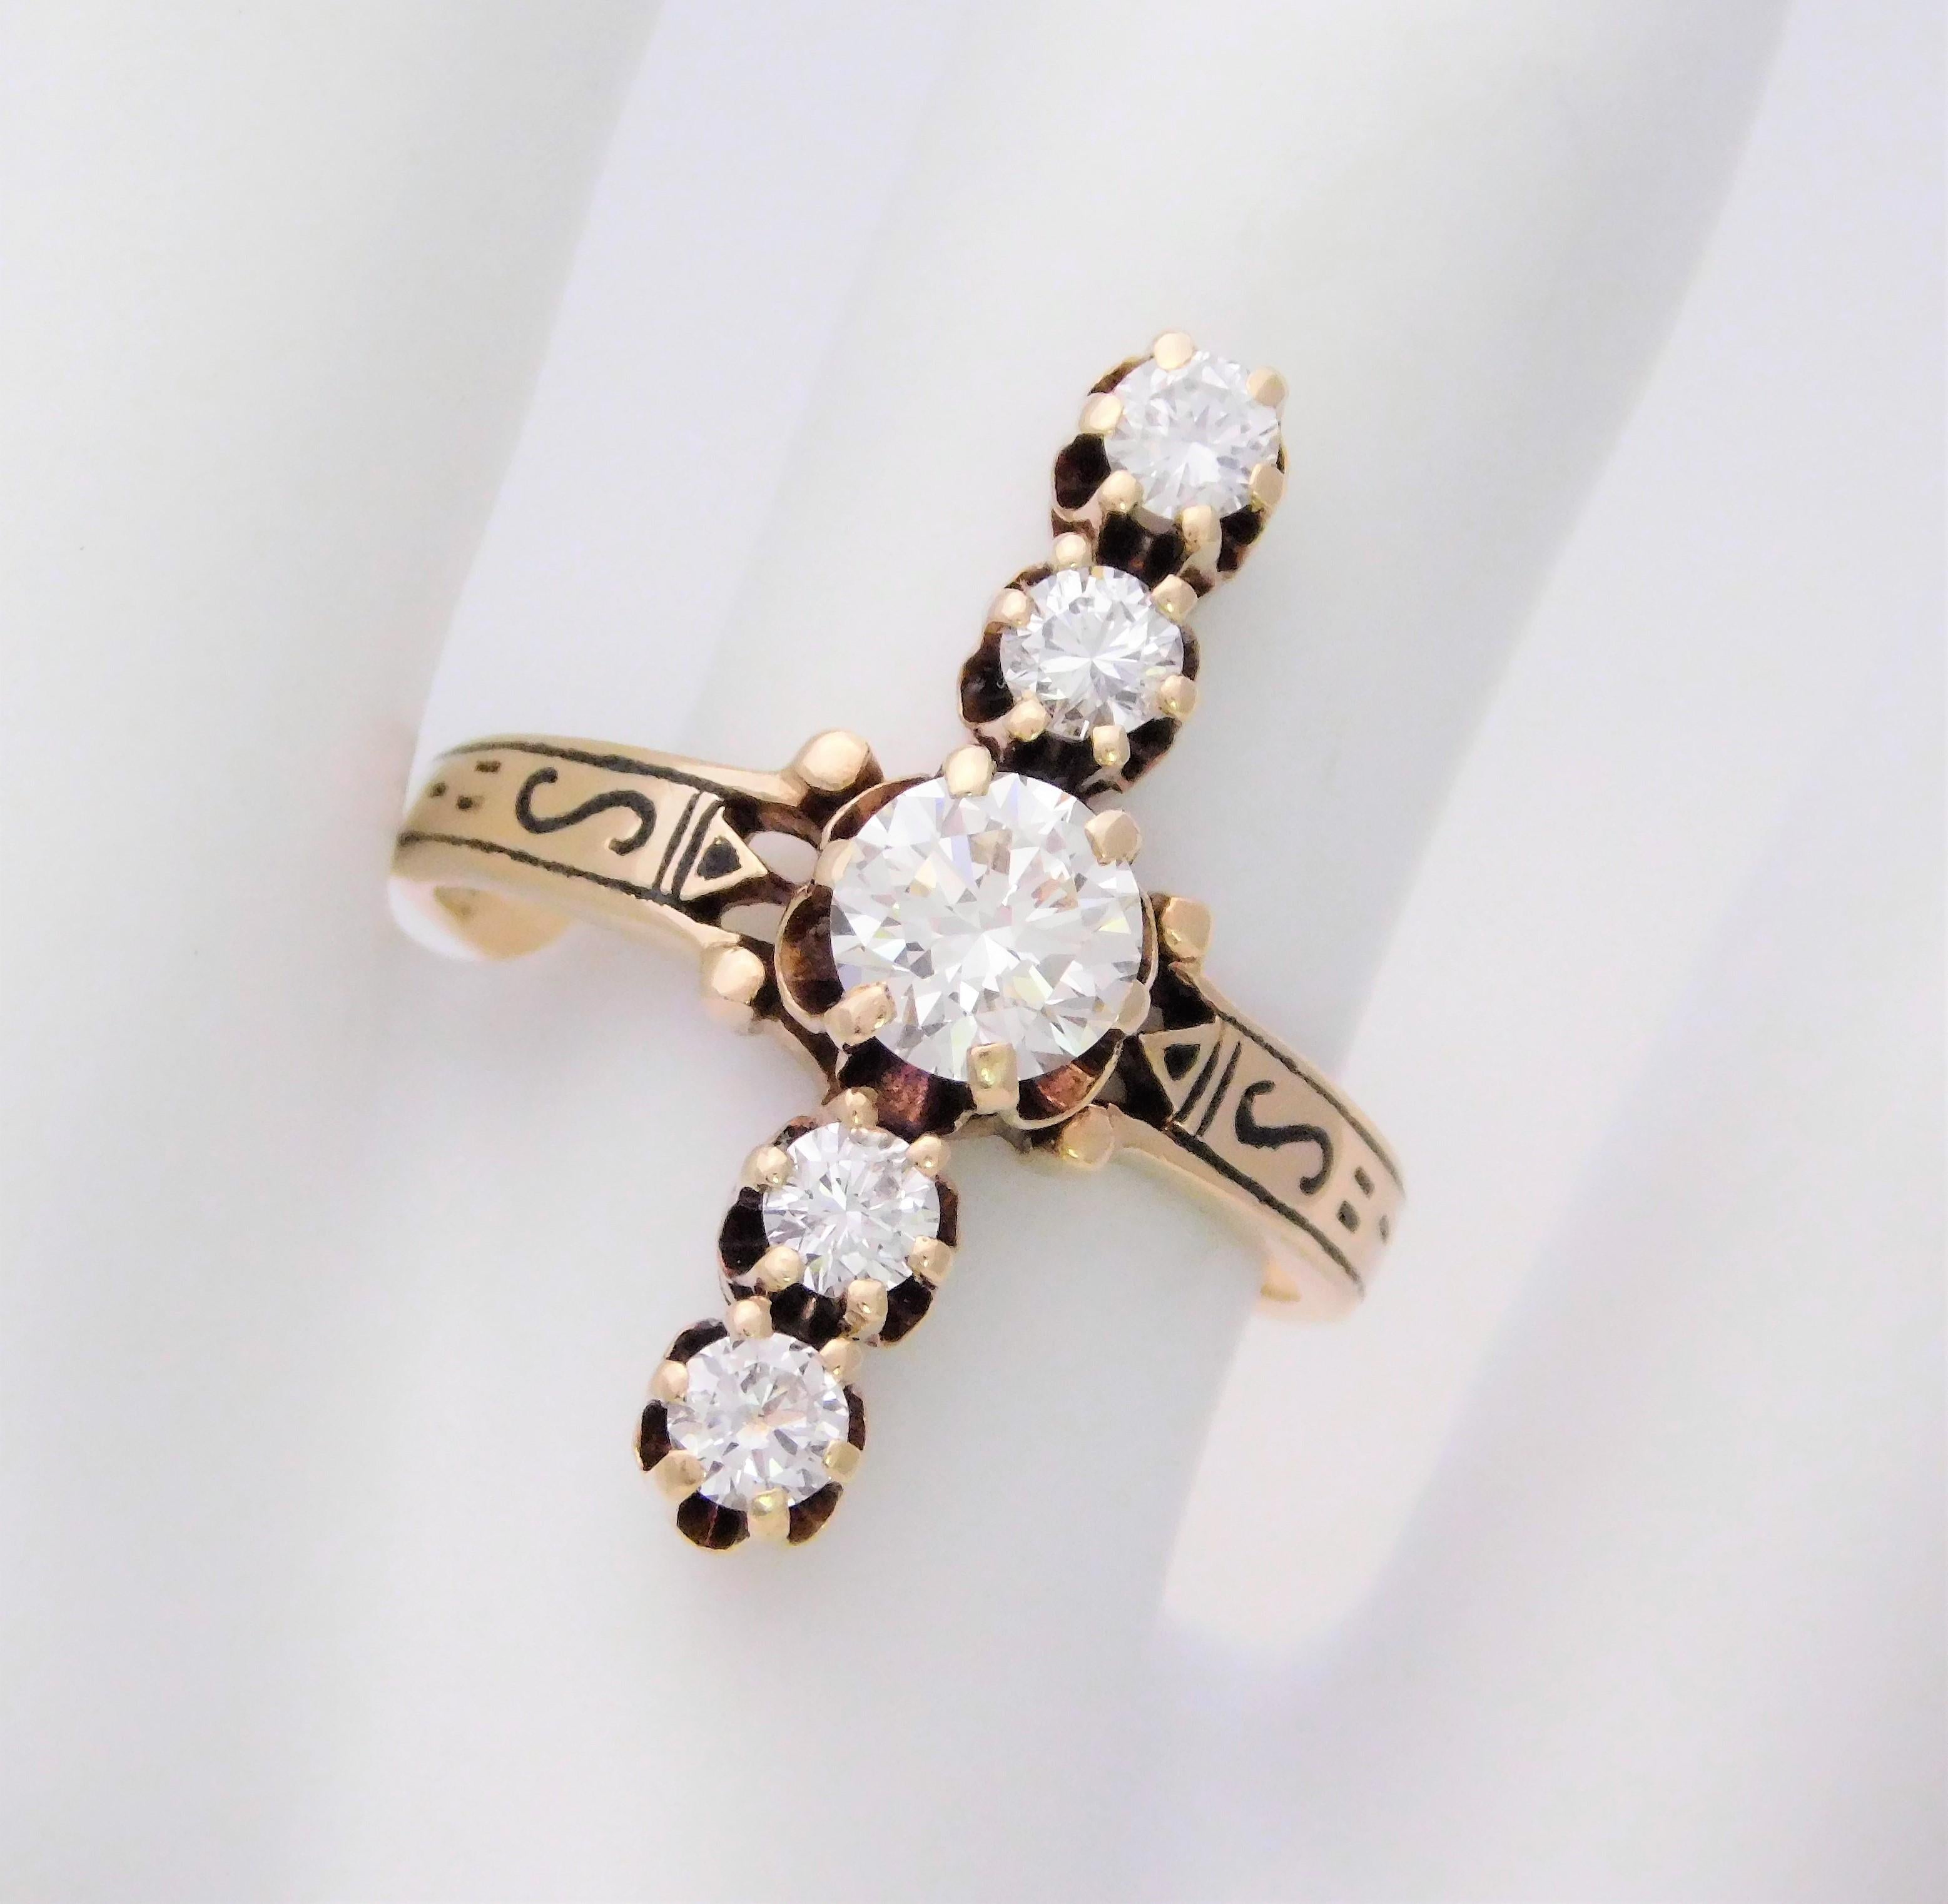 From an elegant aristocratic Southern estate. This jaw-dropping piece caught our attention from the start.  Its unique design and make-up of exquisite materials made this ring our favorite pick in the entire plush collection.
This amazing piece has